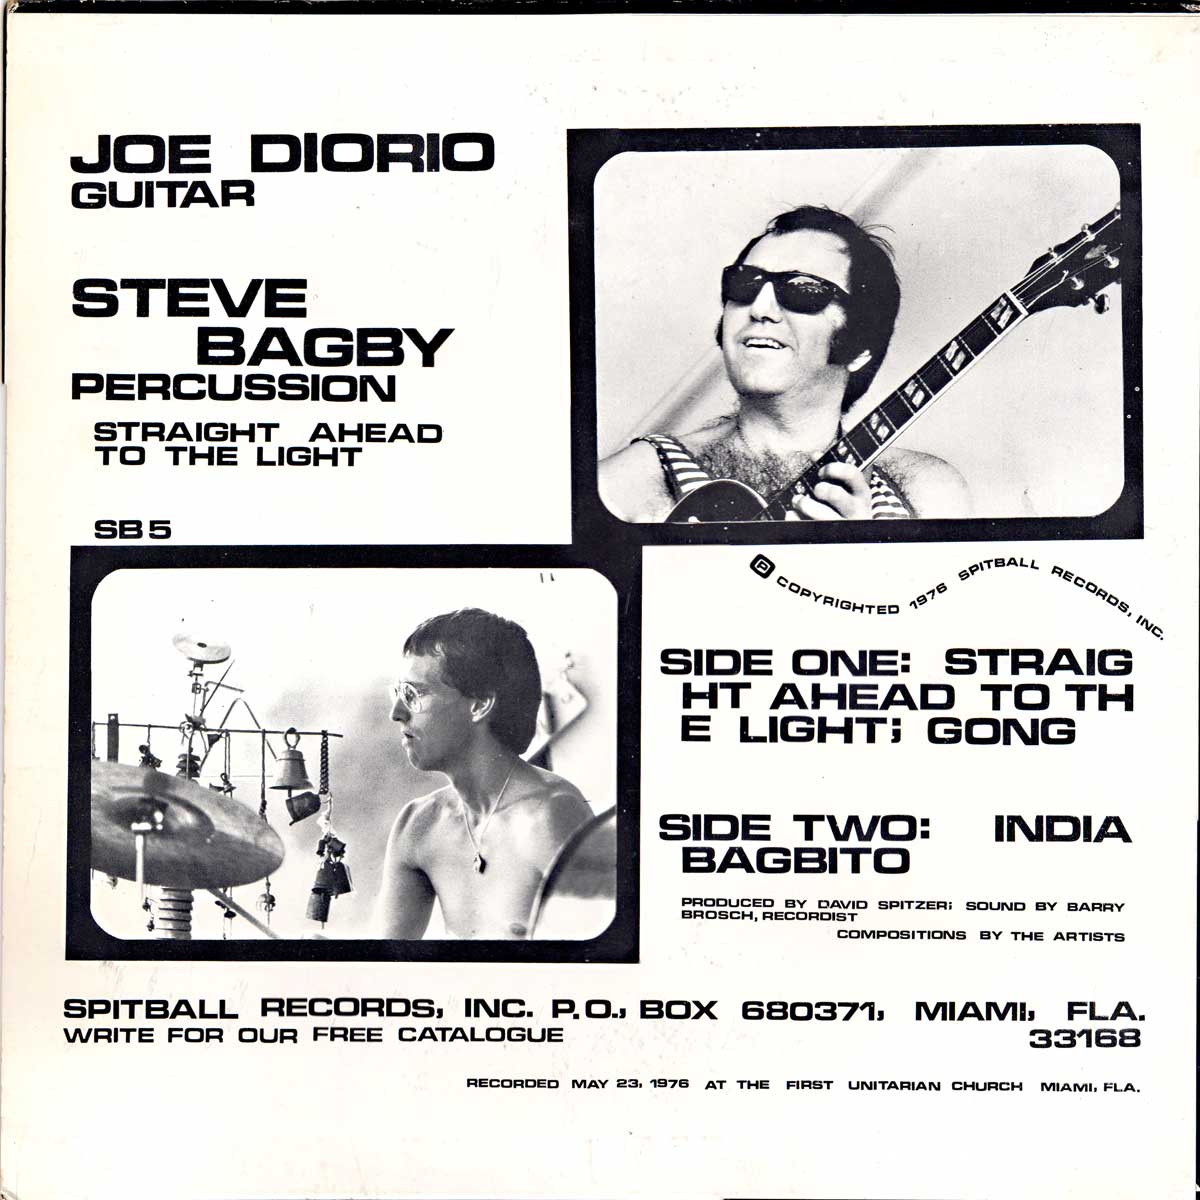 Joe Diorio, Steve Bagby - Straight Ahead To The Light - Back cover